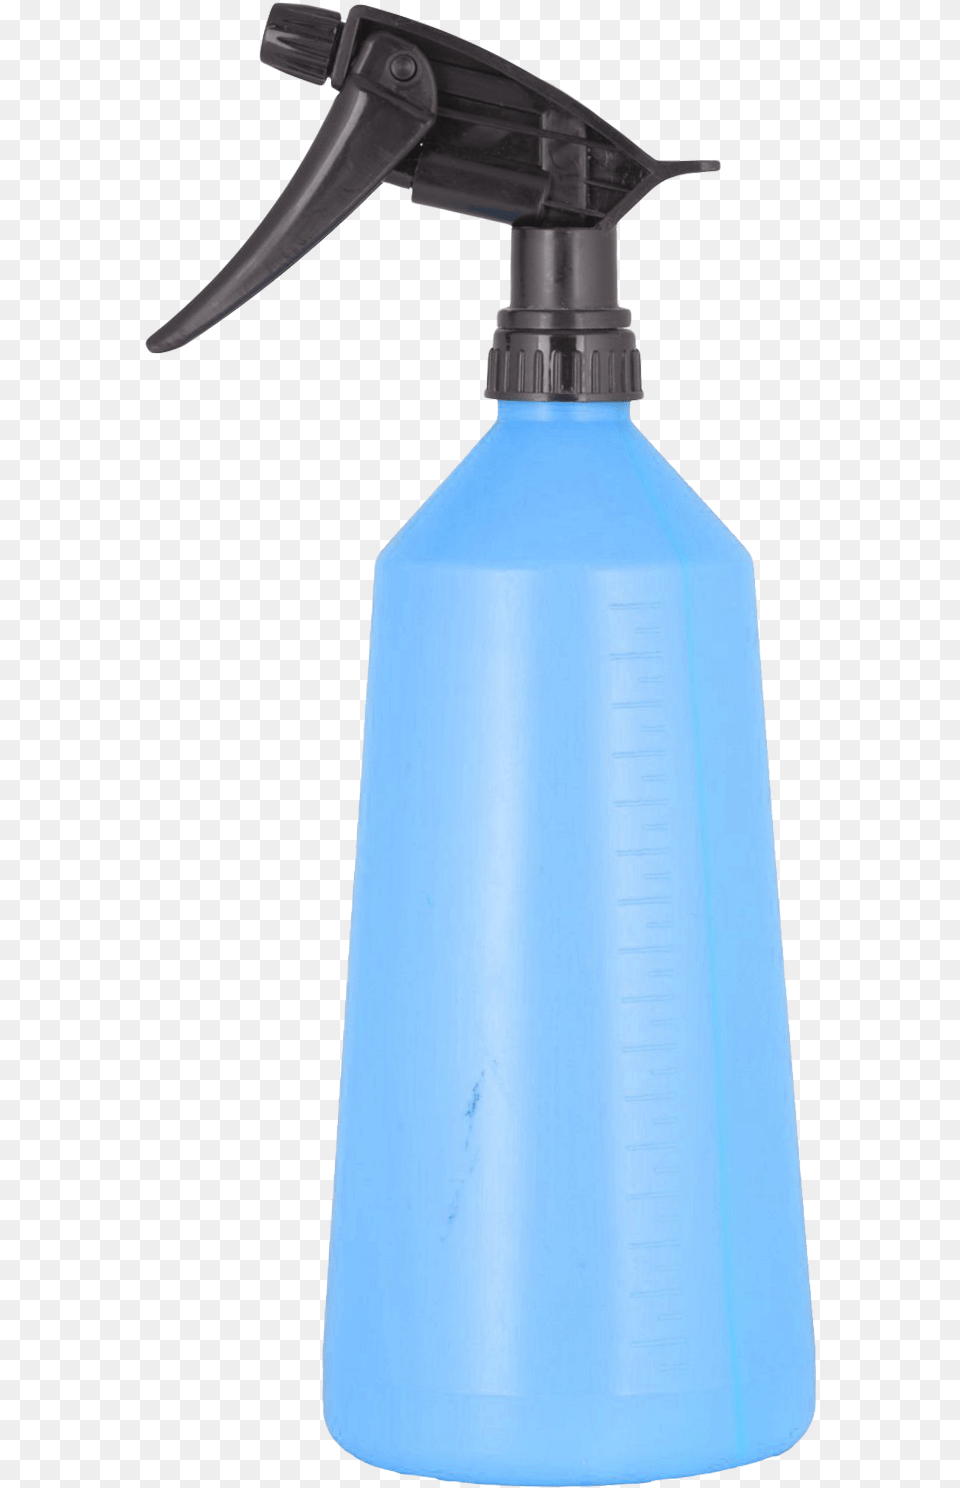 Spray Bottle Transparent Image, Can, Spray Can, Tin Free Png Download